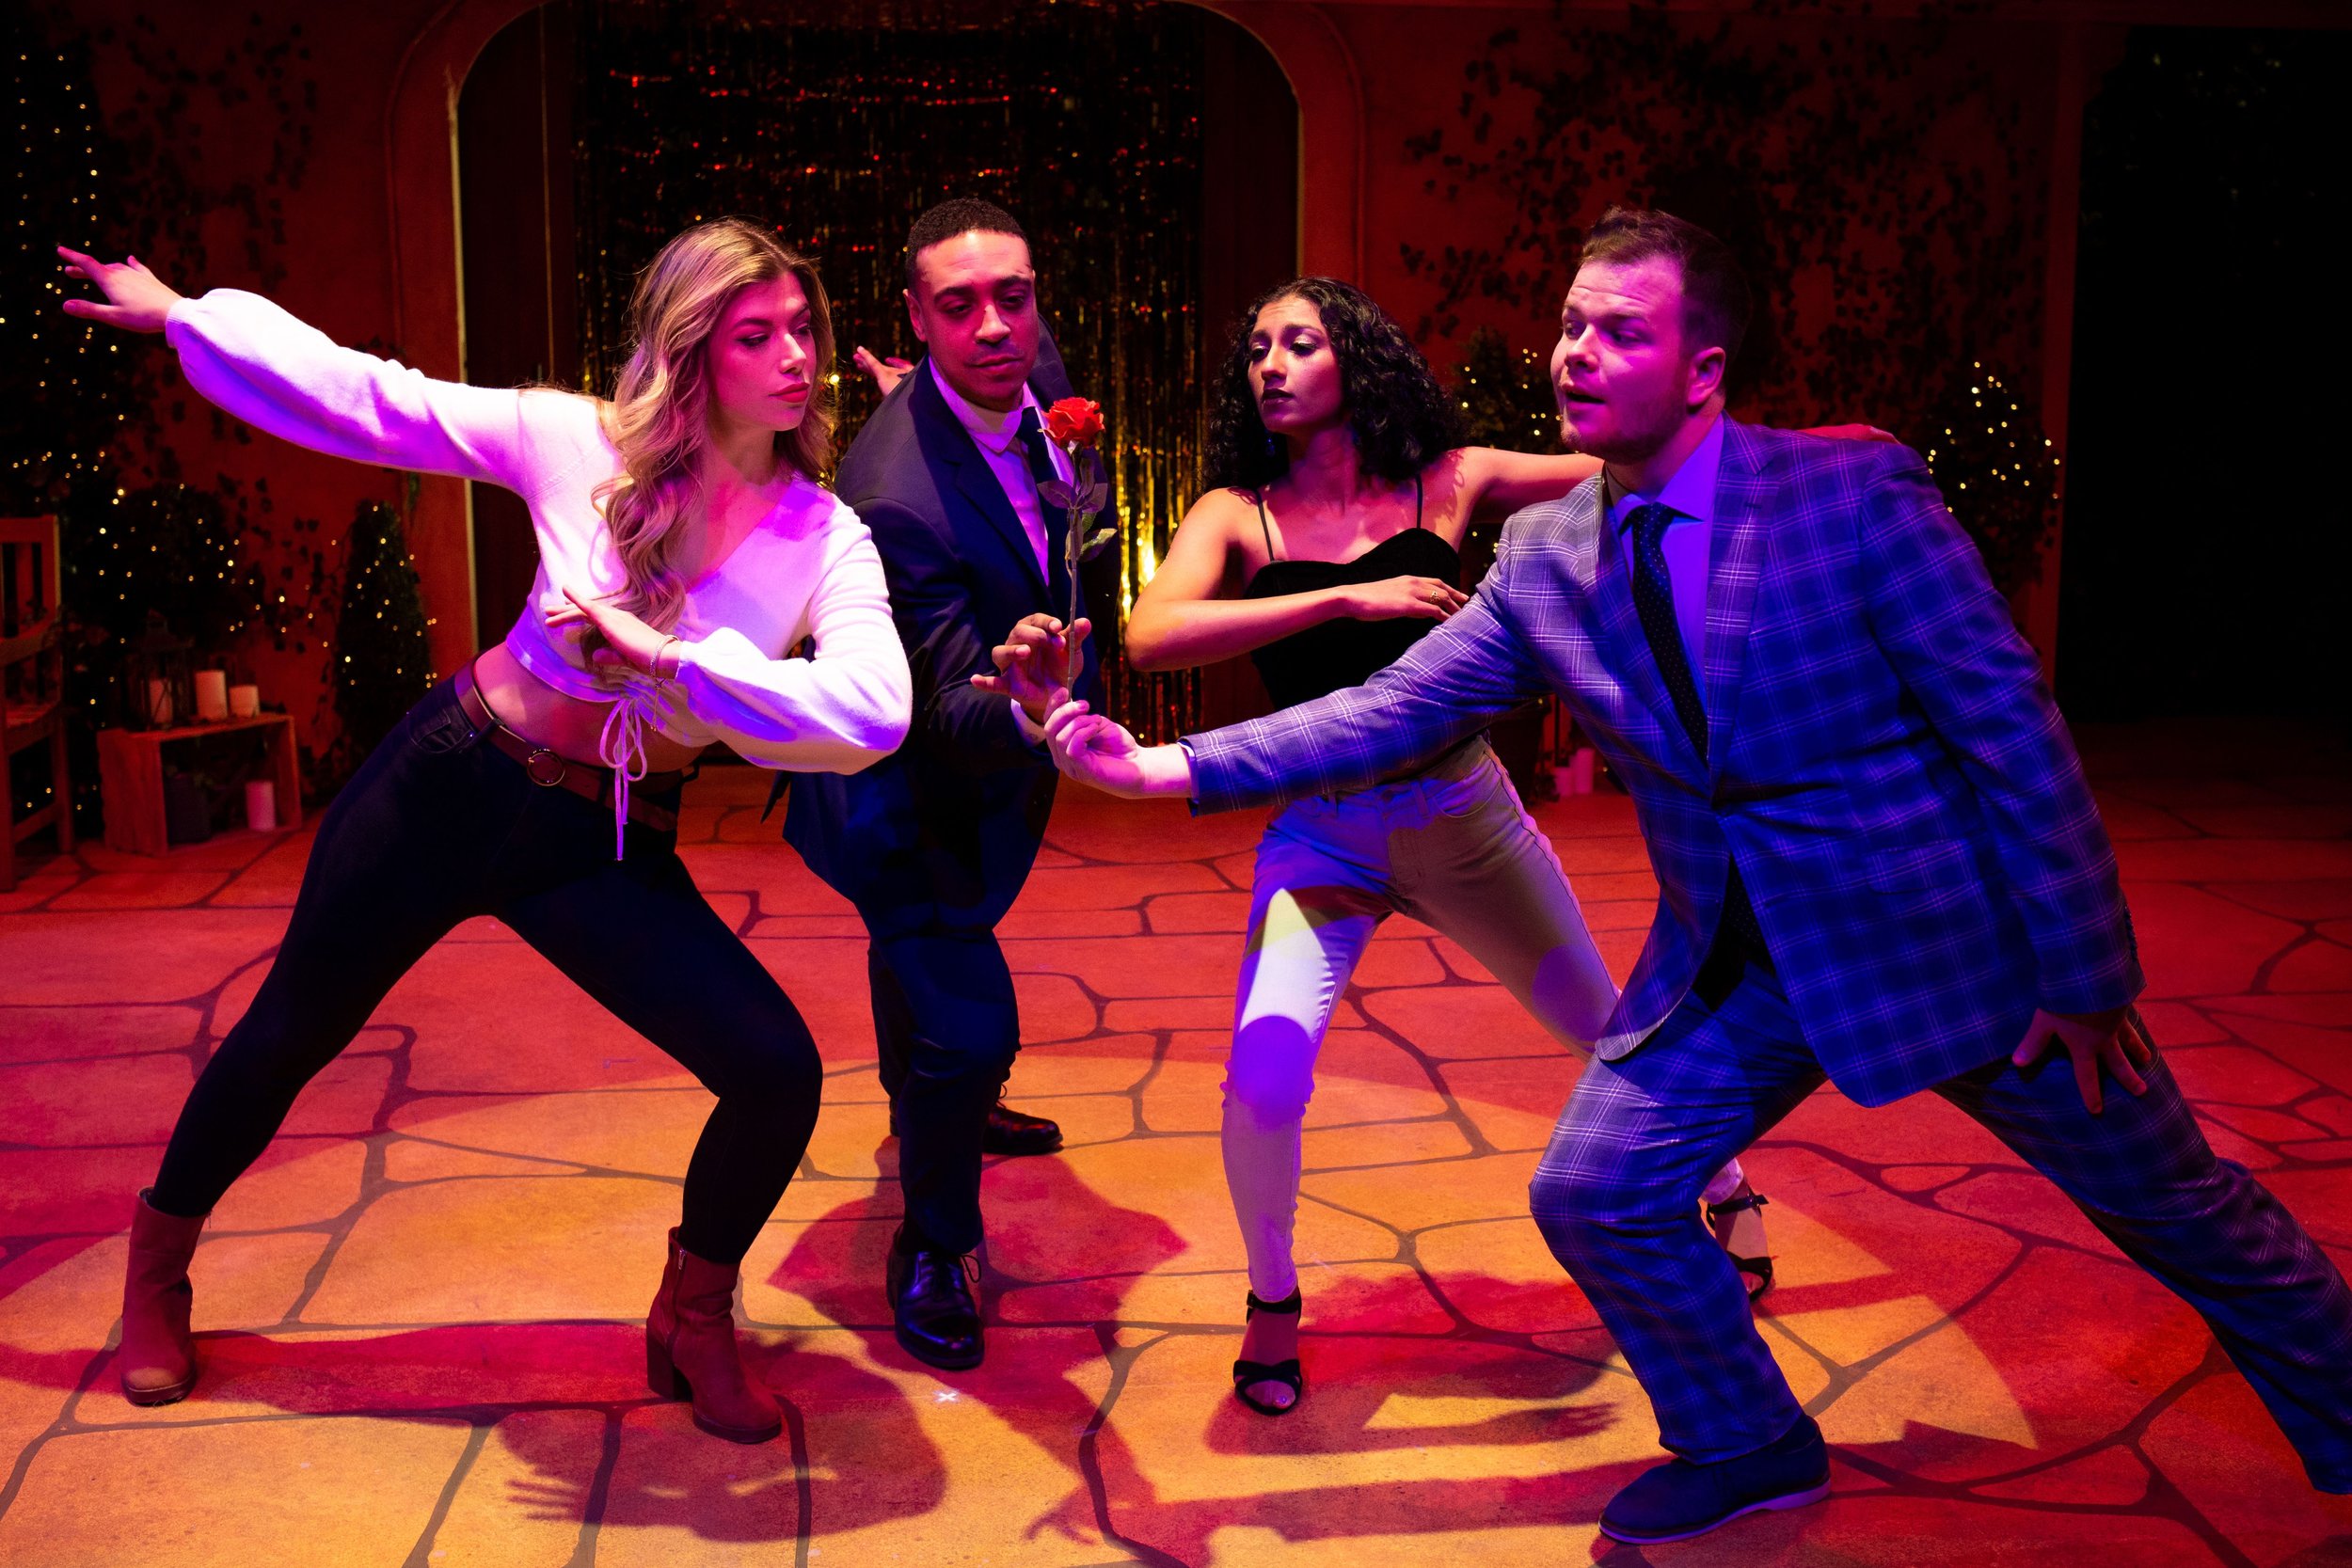 Bachelor The Unauthorized Parody Musical